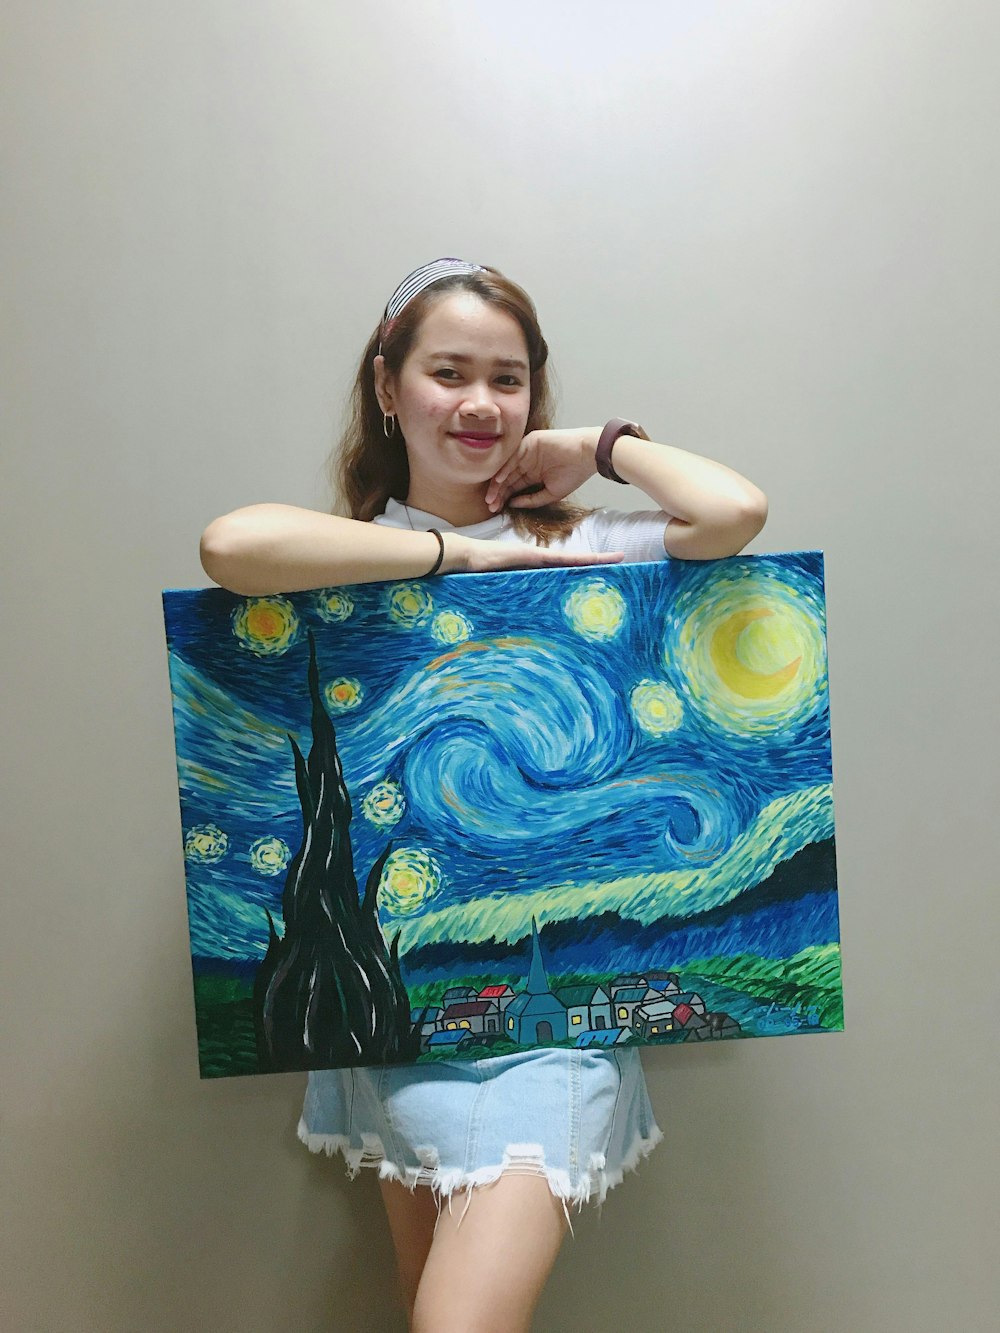 smiling woman standing and holding Starry Night painting by Vincent Van Gogh